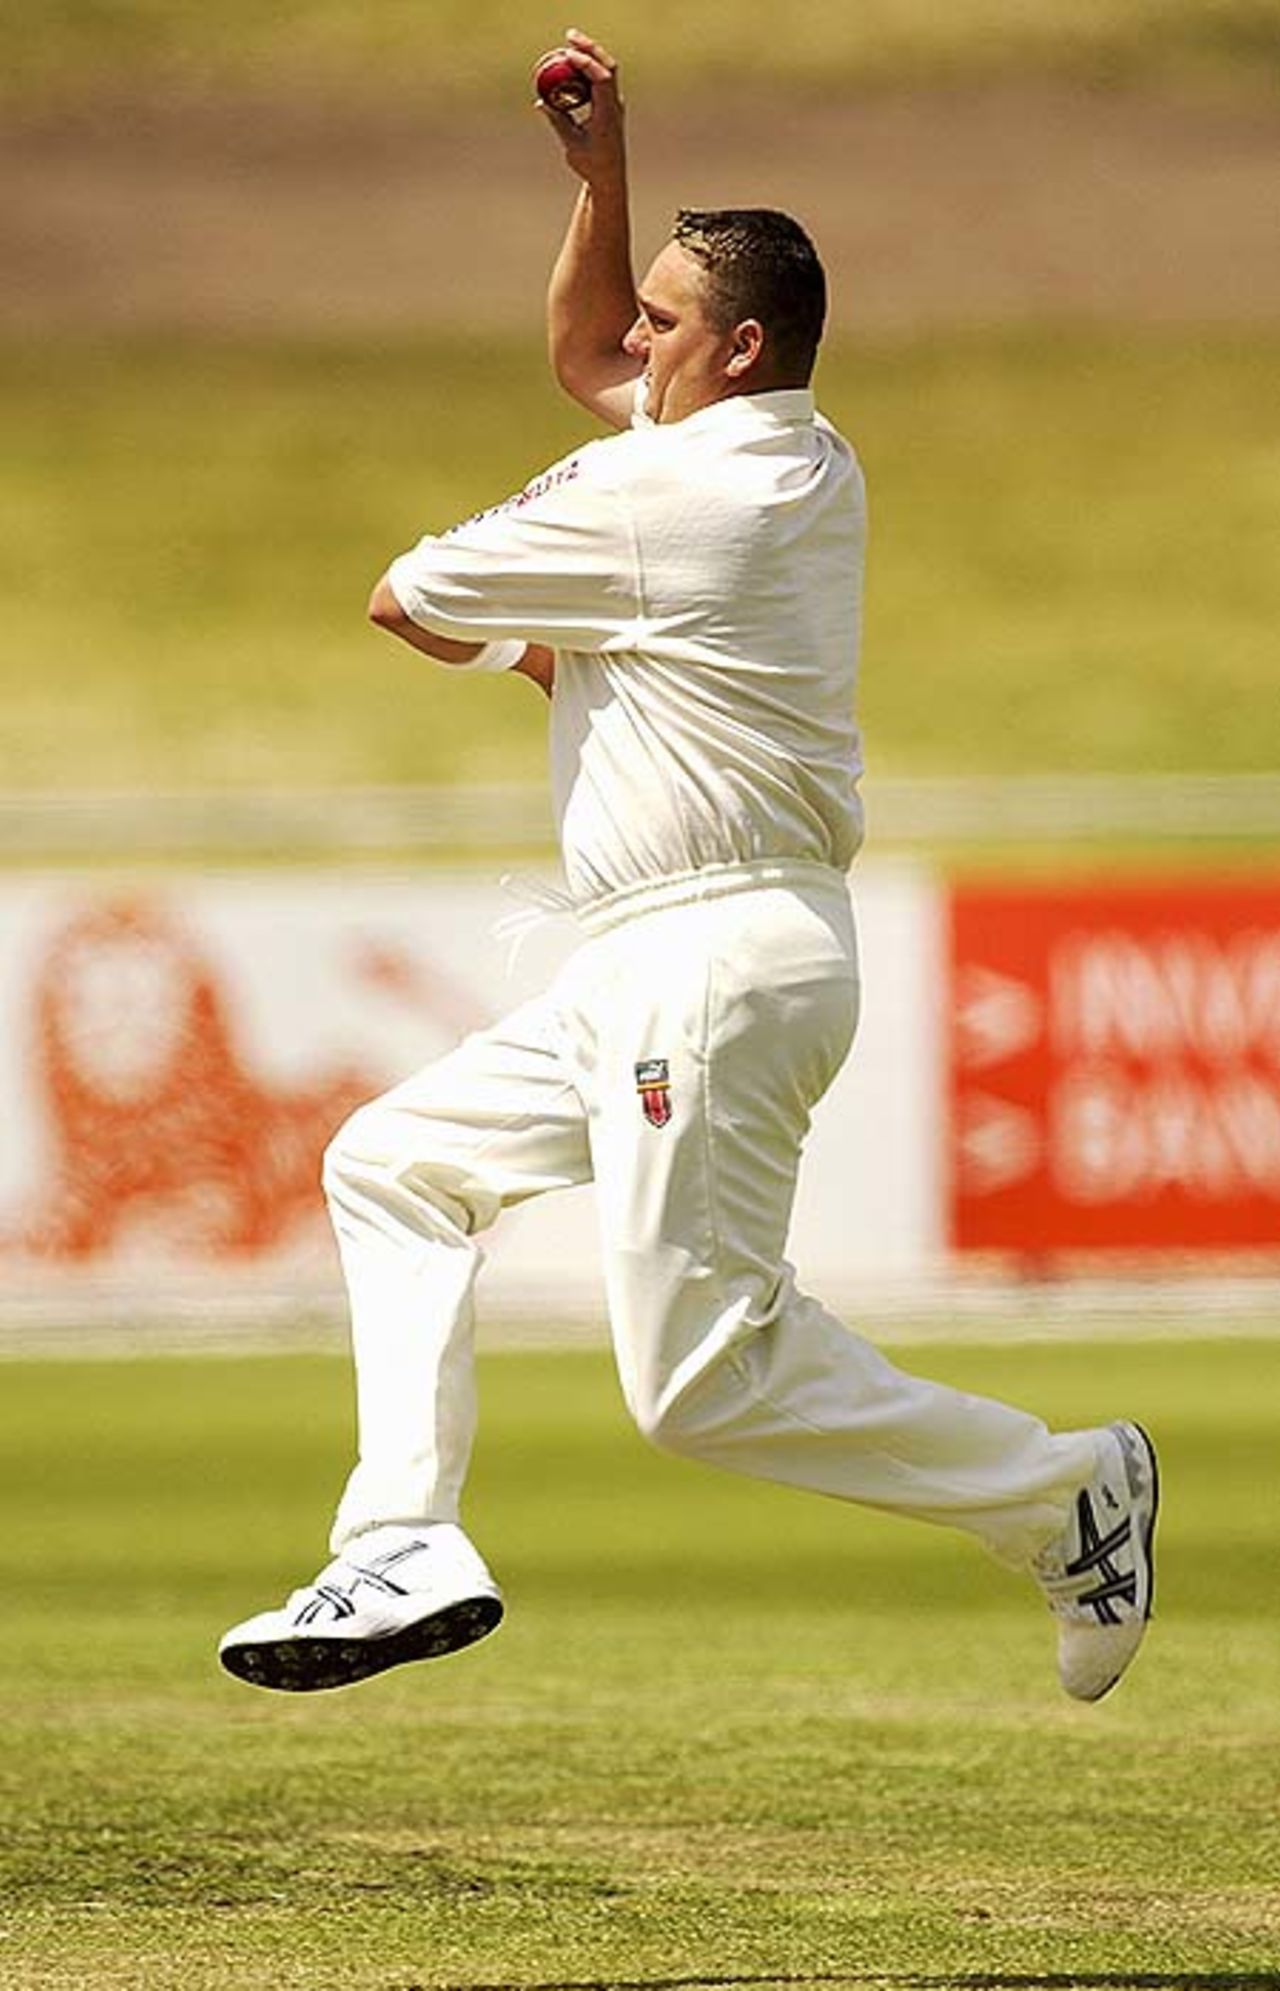 HOBART - NOVEMBER 23: Don Nash of the Blues about to bowl a delivery during the second day of the Pura Cup match between the the Tasmanian Tigers and the New South Wales Blues played at the Bellerive Oval, Hobart, Australia on November 23, 2002.